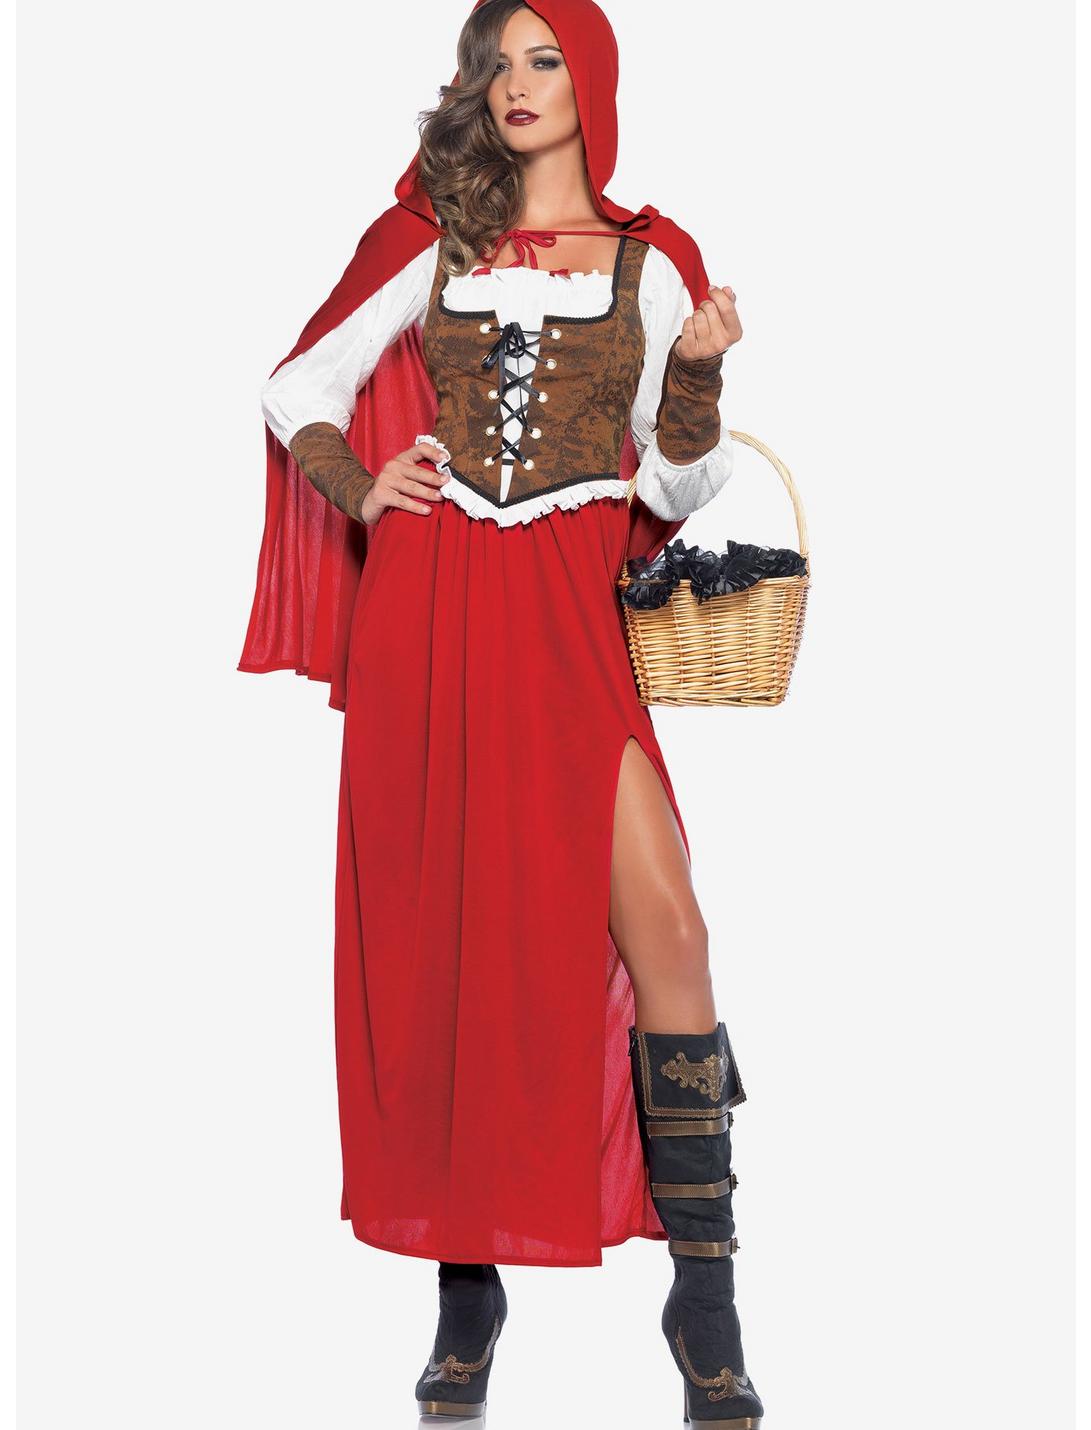 Woodland Red Riding Hood Costume, RED, hi-res